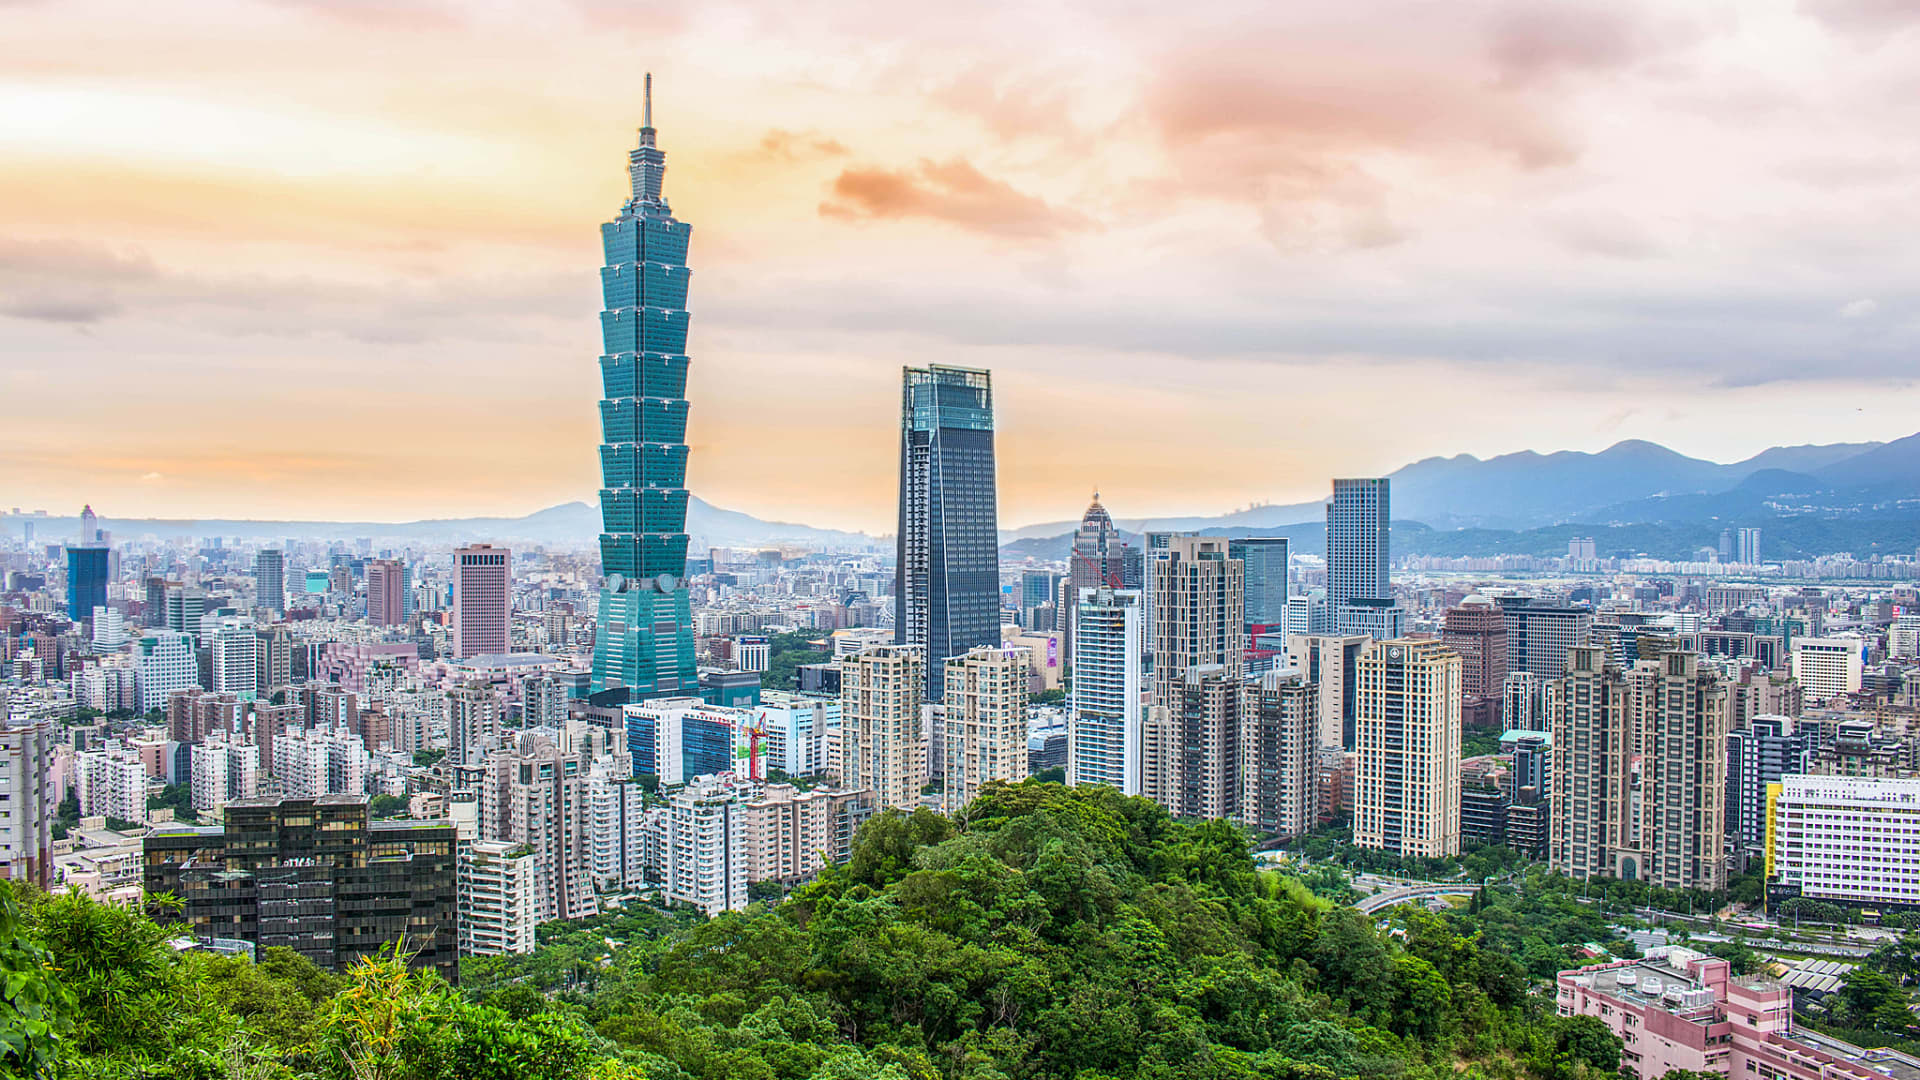 Taiwan shares hit record highs on AI boom with more room to rally [Video]